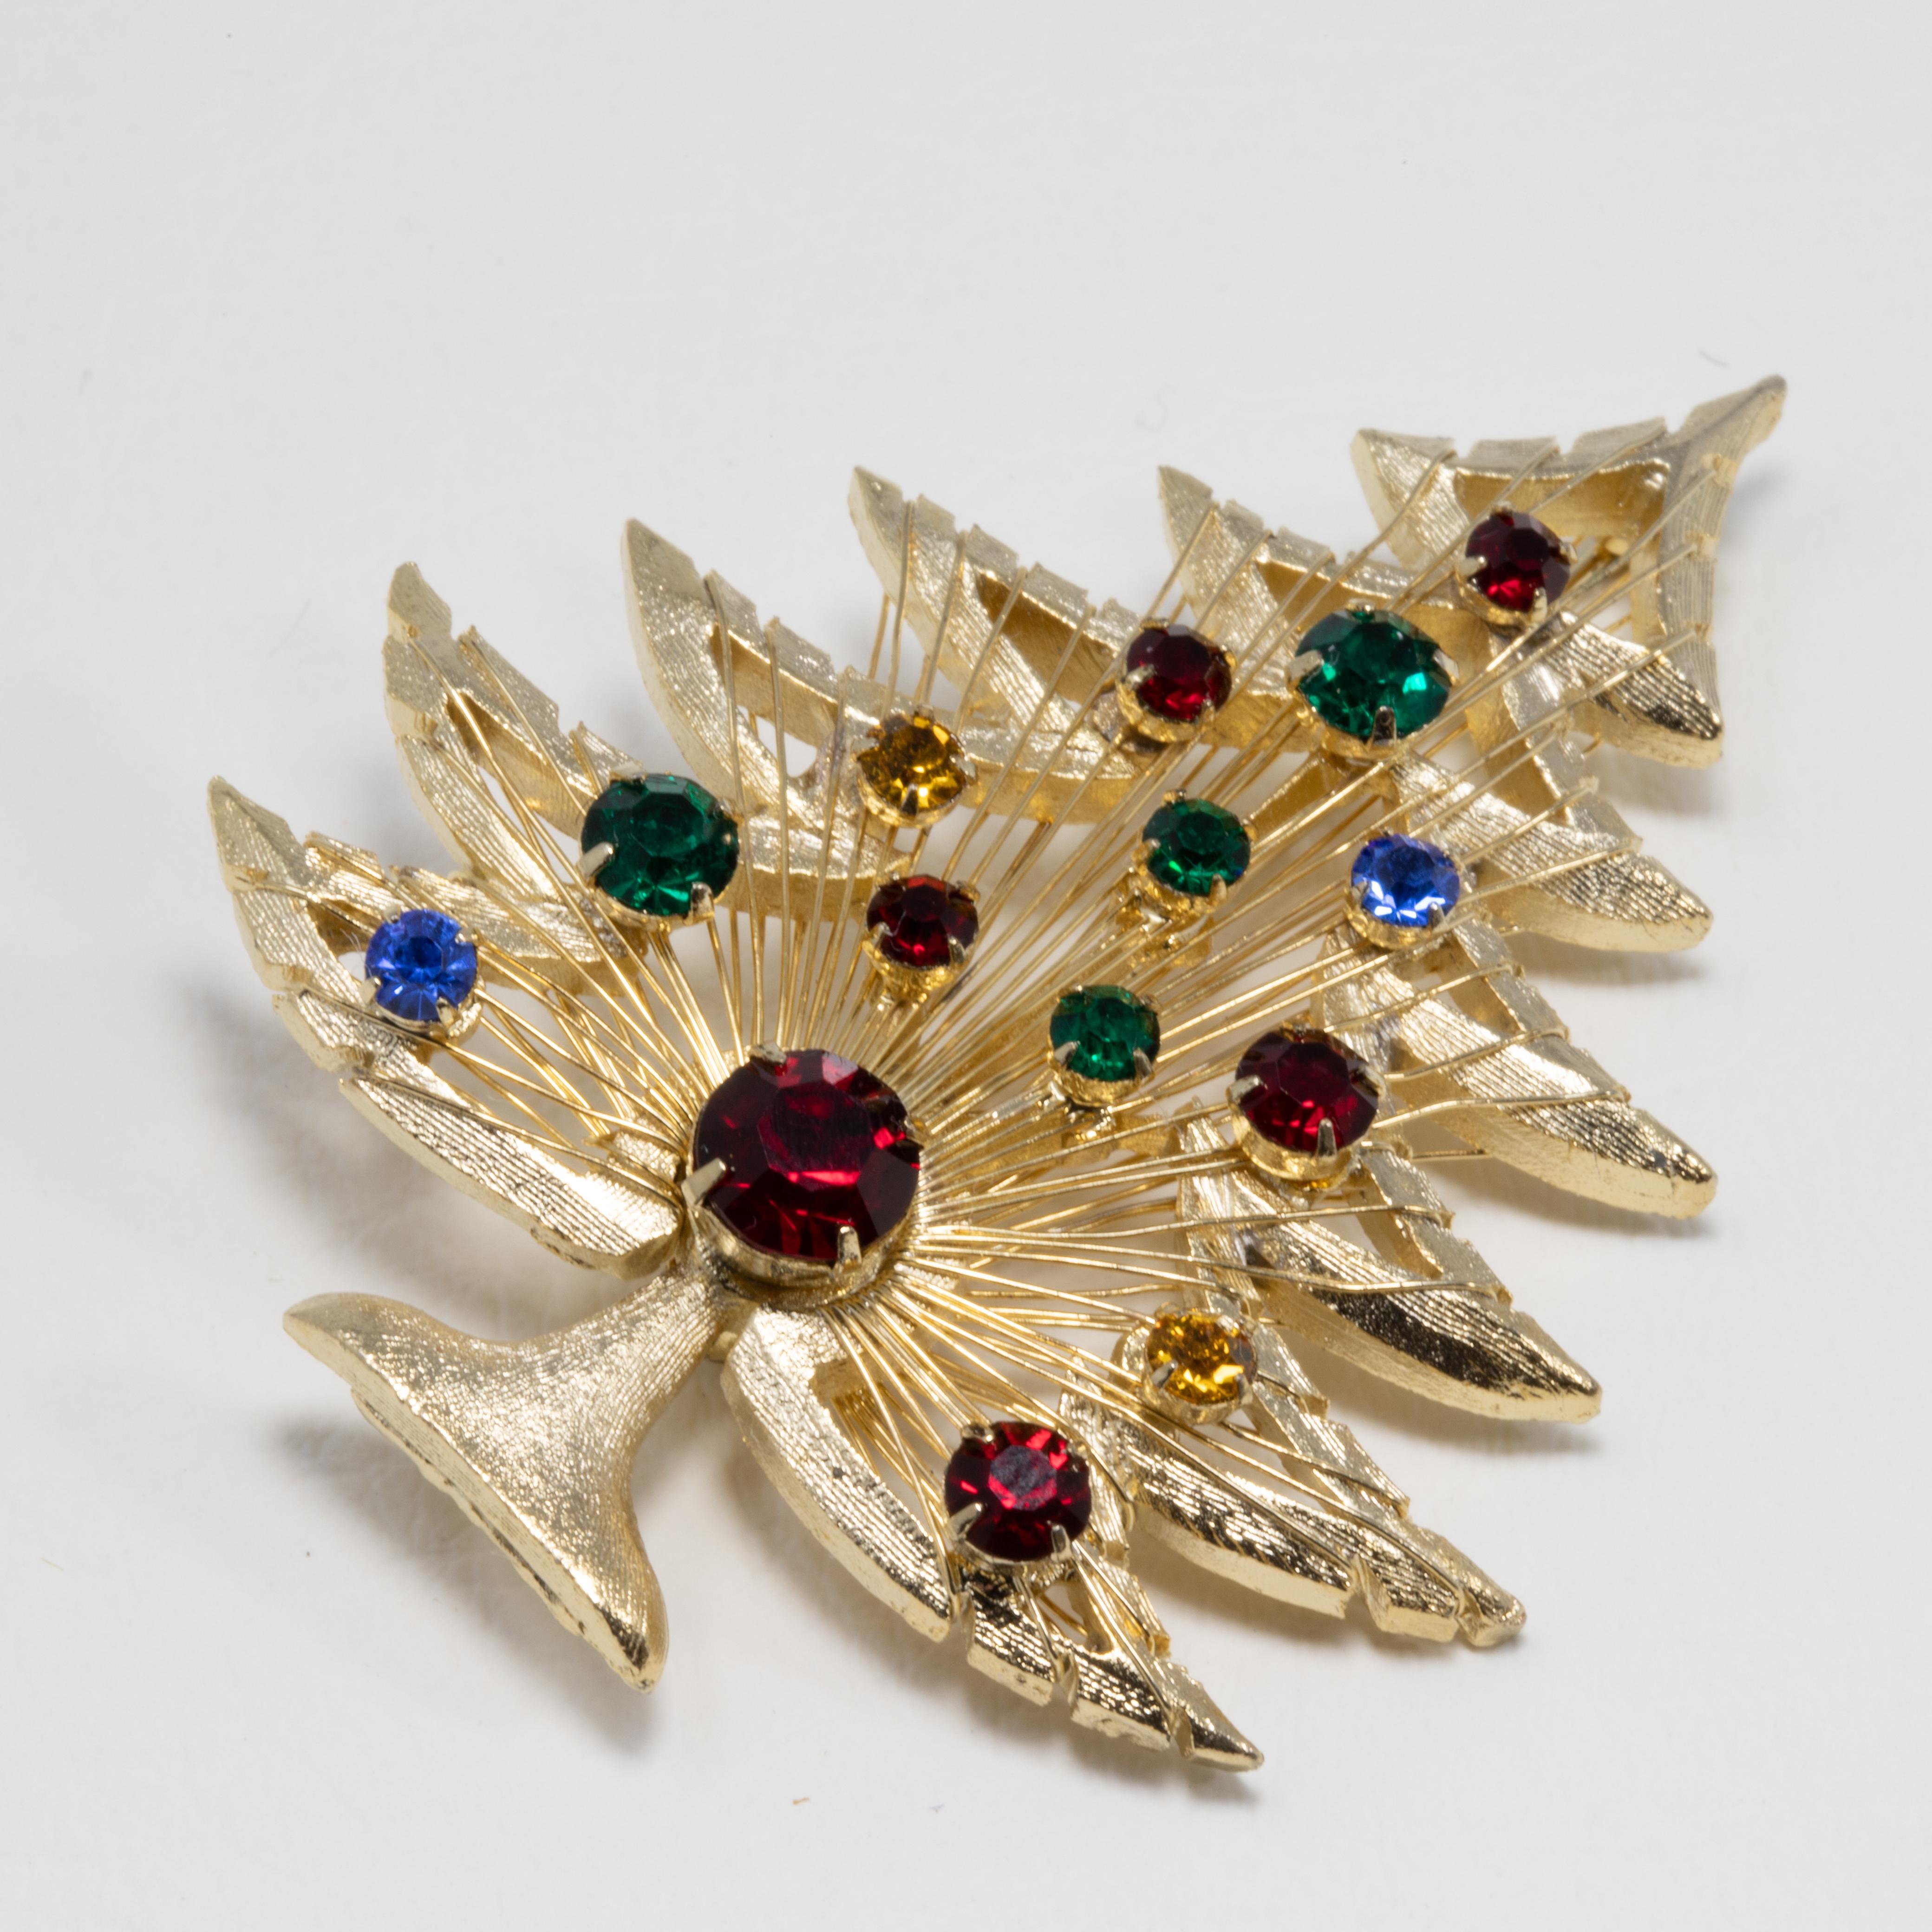 A vintage Christmas tree brooch in gold finish. The perfect festive accessory!  The wired tree is accented with red, green, blue, and orange crystals, all in prong settings.

Hallmarks: © Brooks